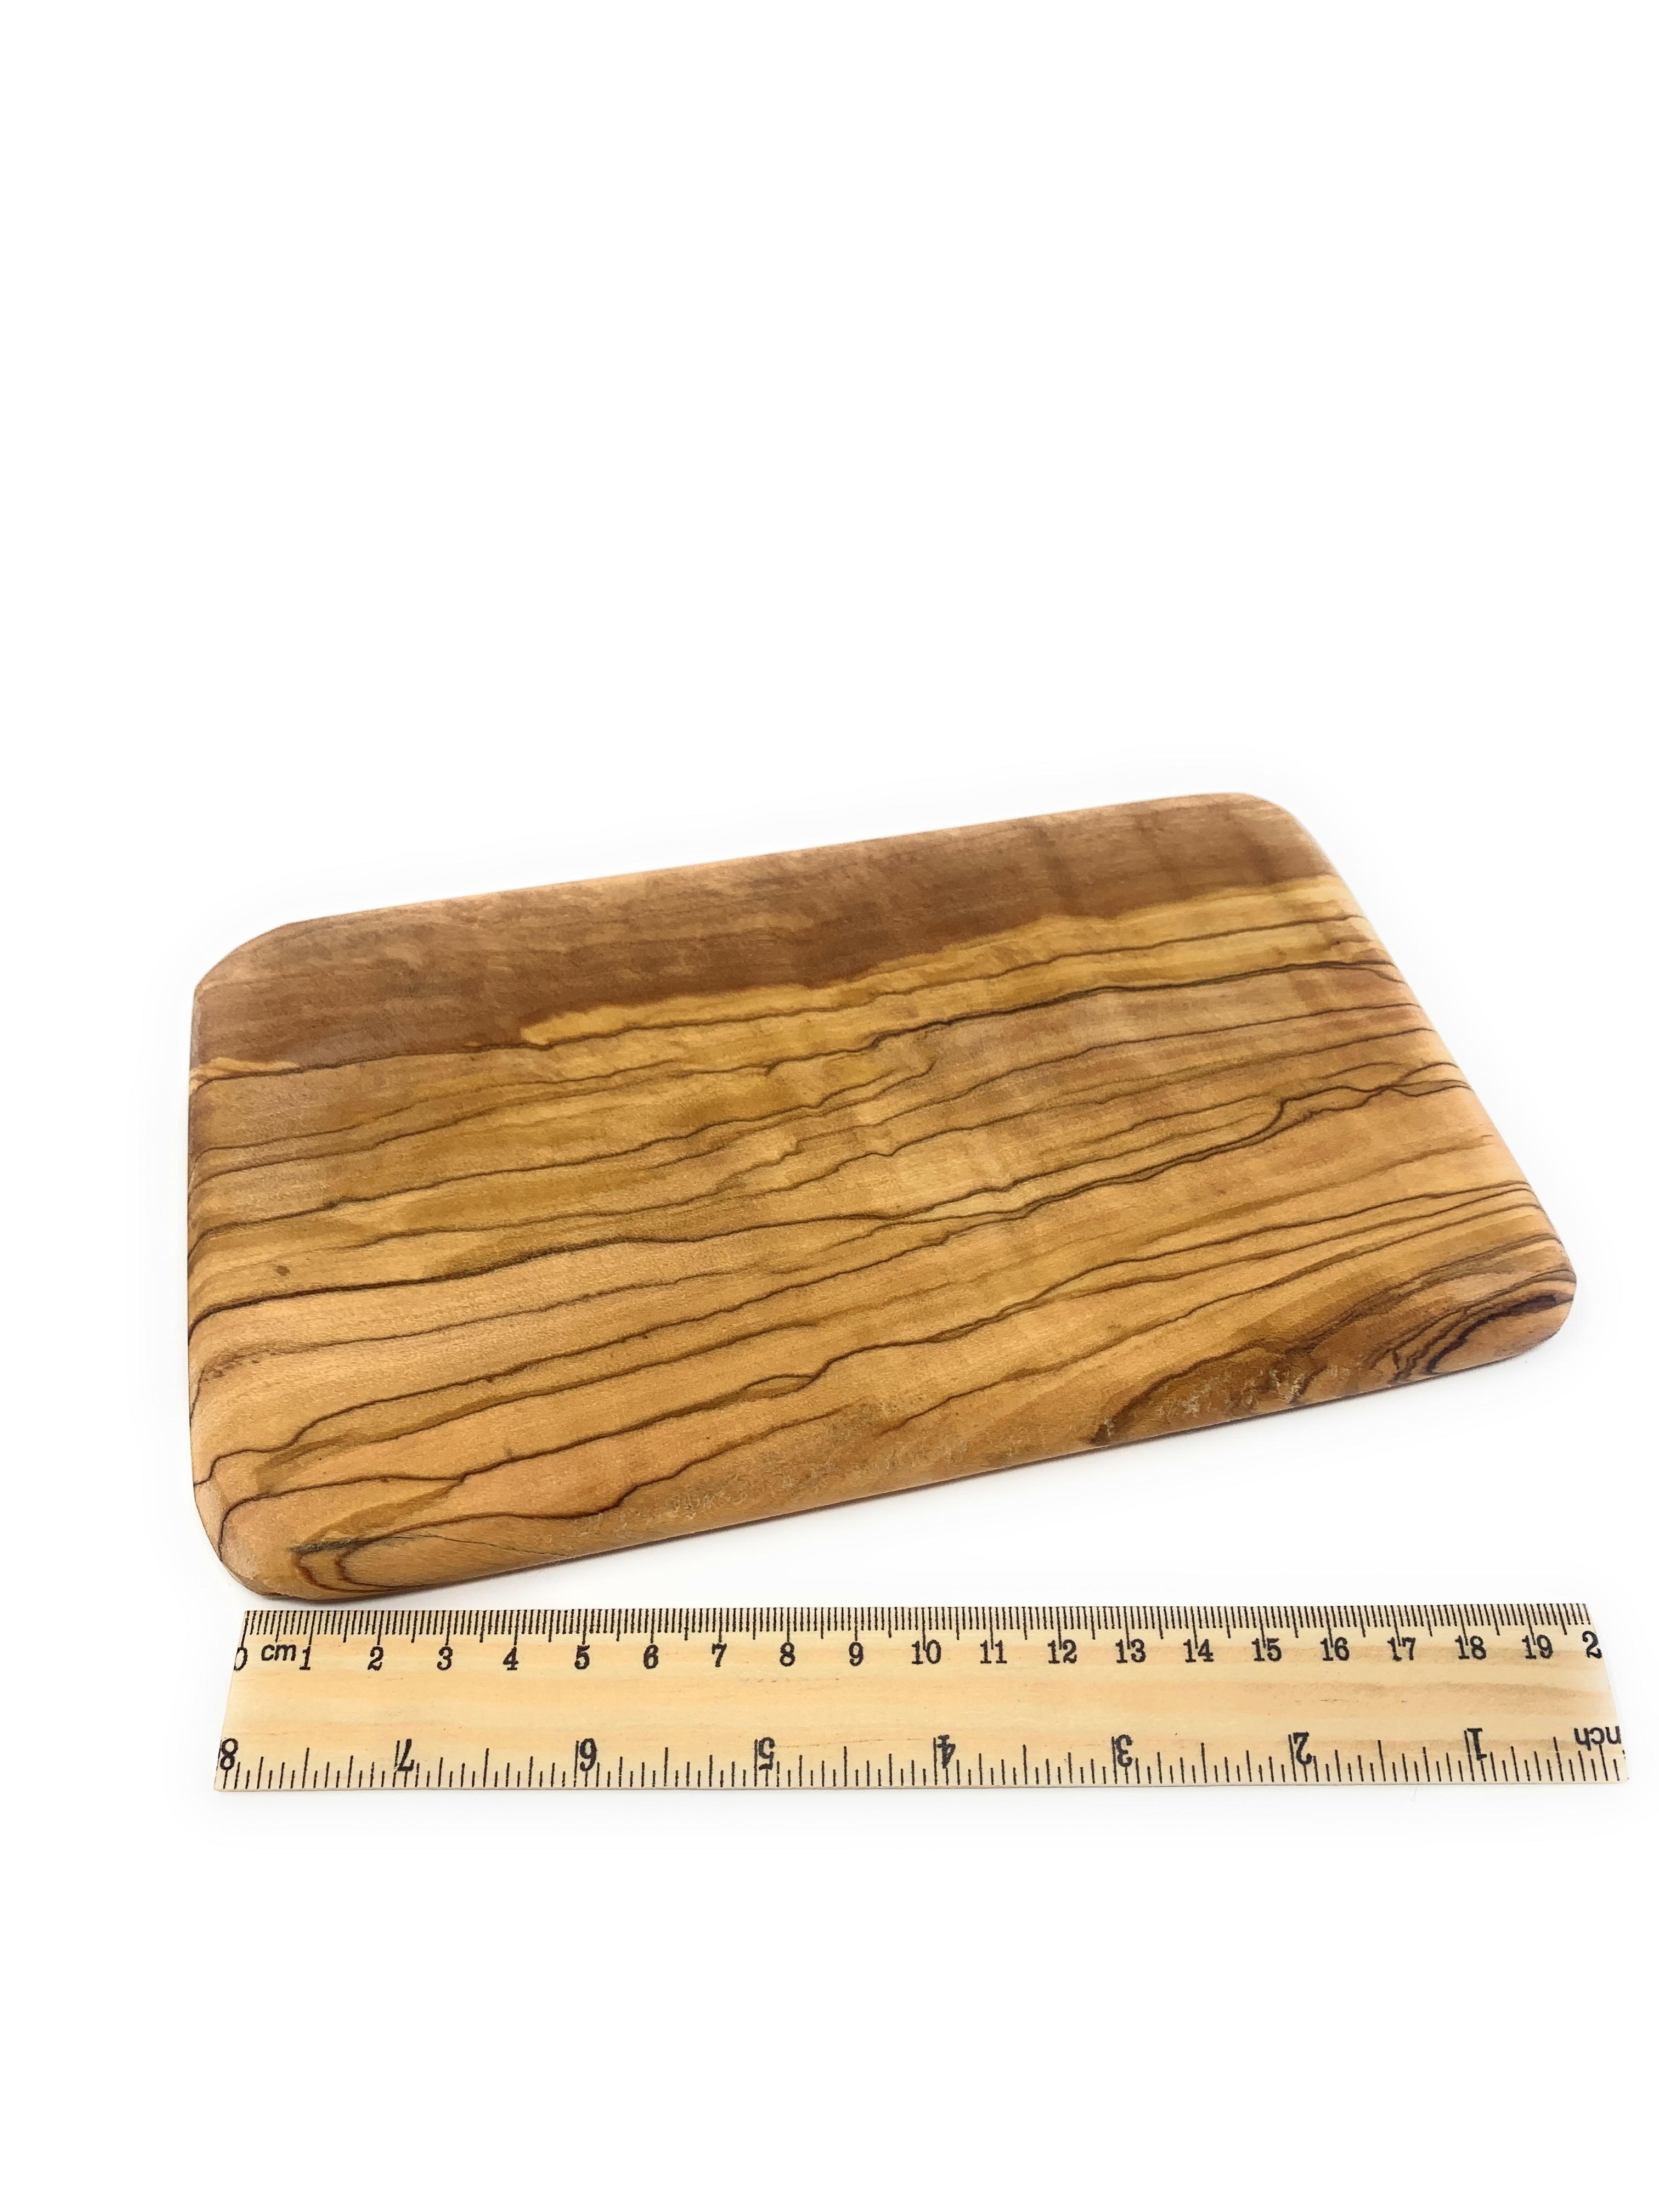 Olive Wood Serving Tray - Curved Edge - 22cm